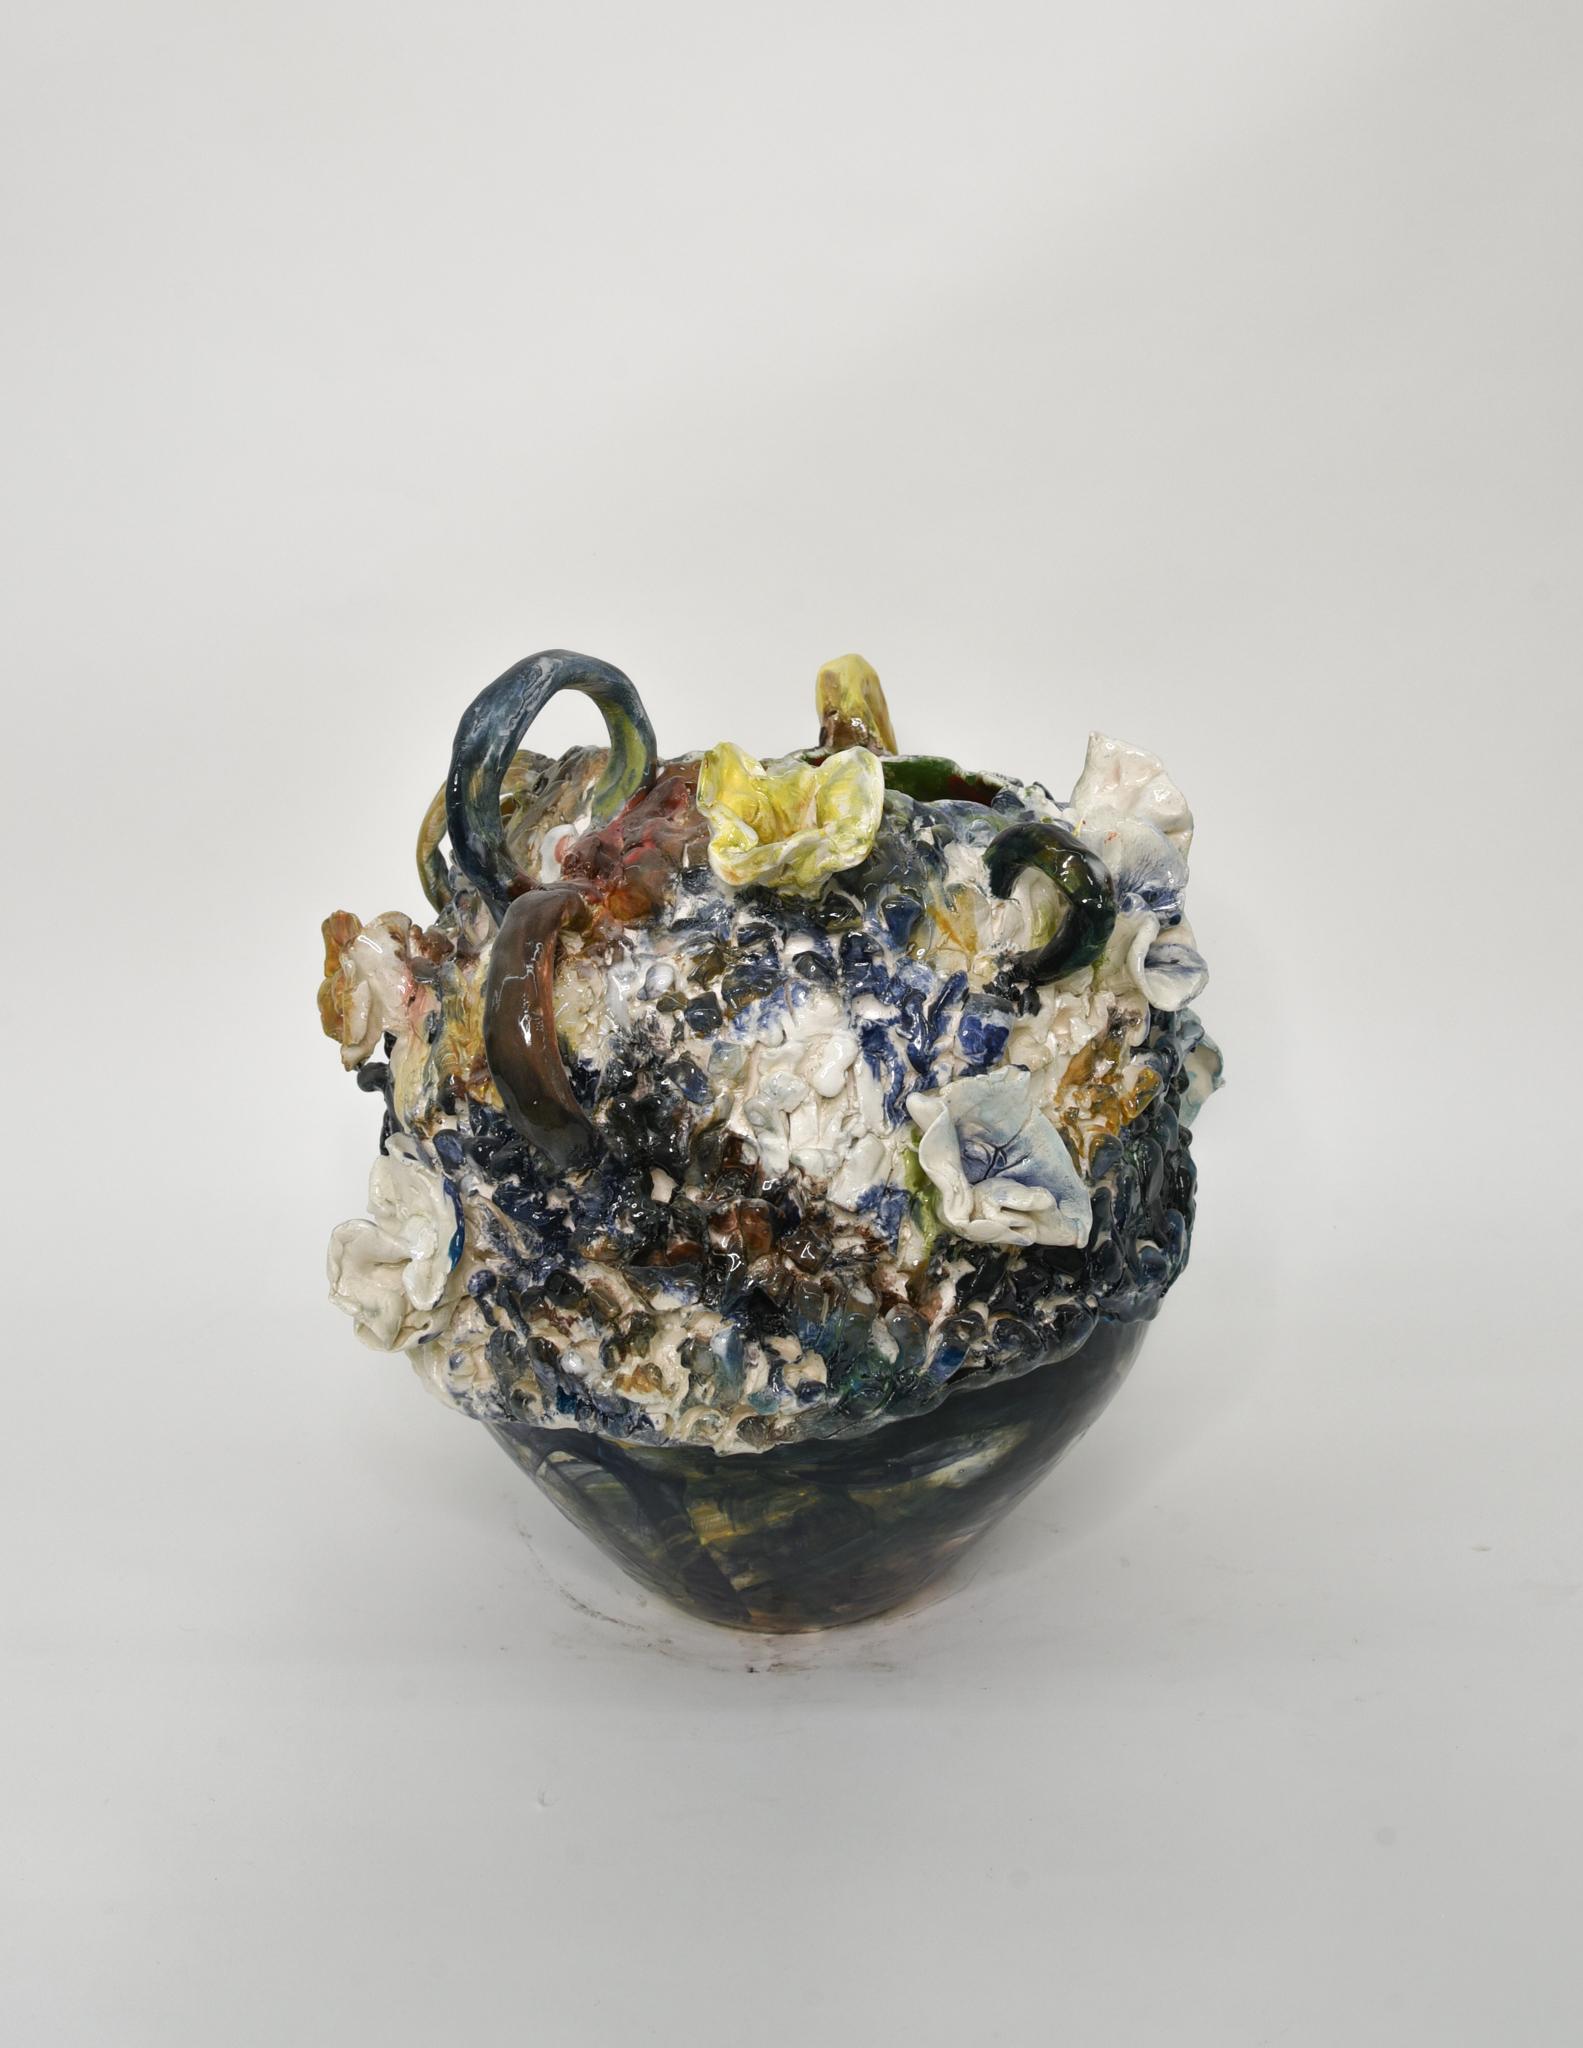 Blue and Yellow. Glazed ceramic abstract jar sculpture - Abstract Sculpture by Charo Oquet